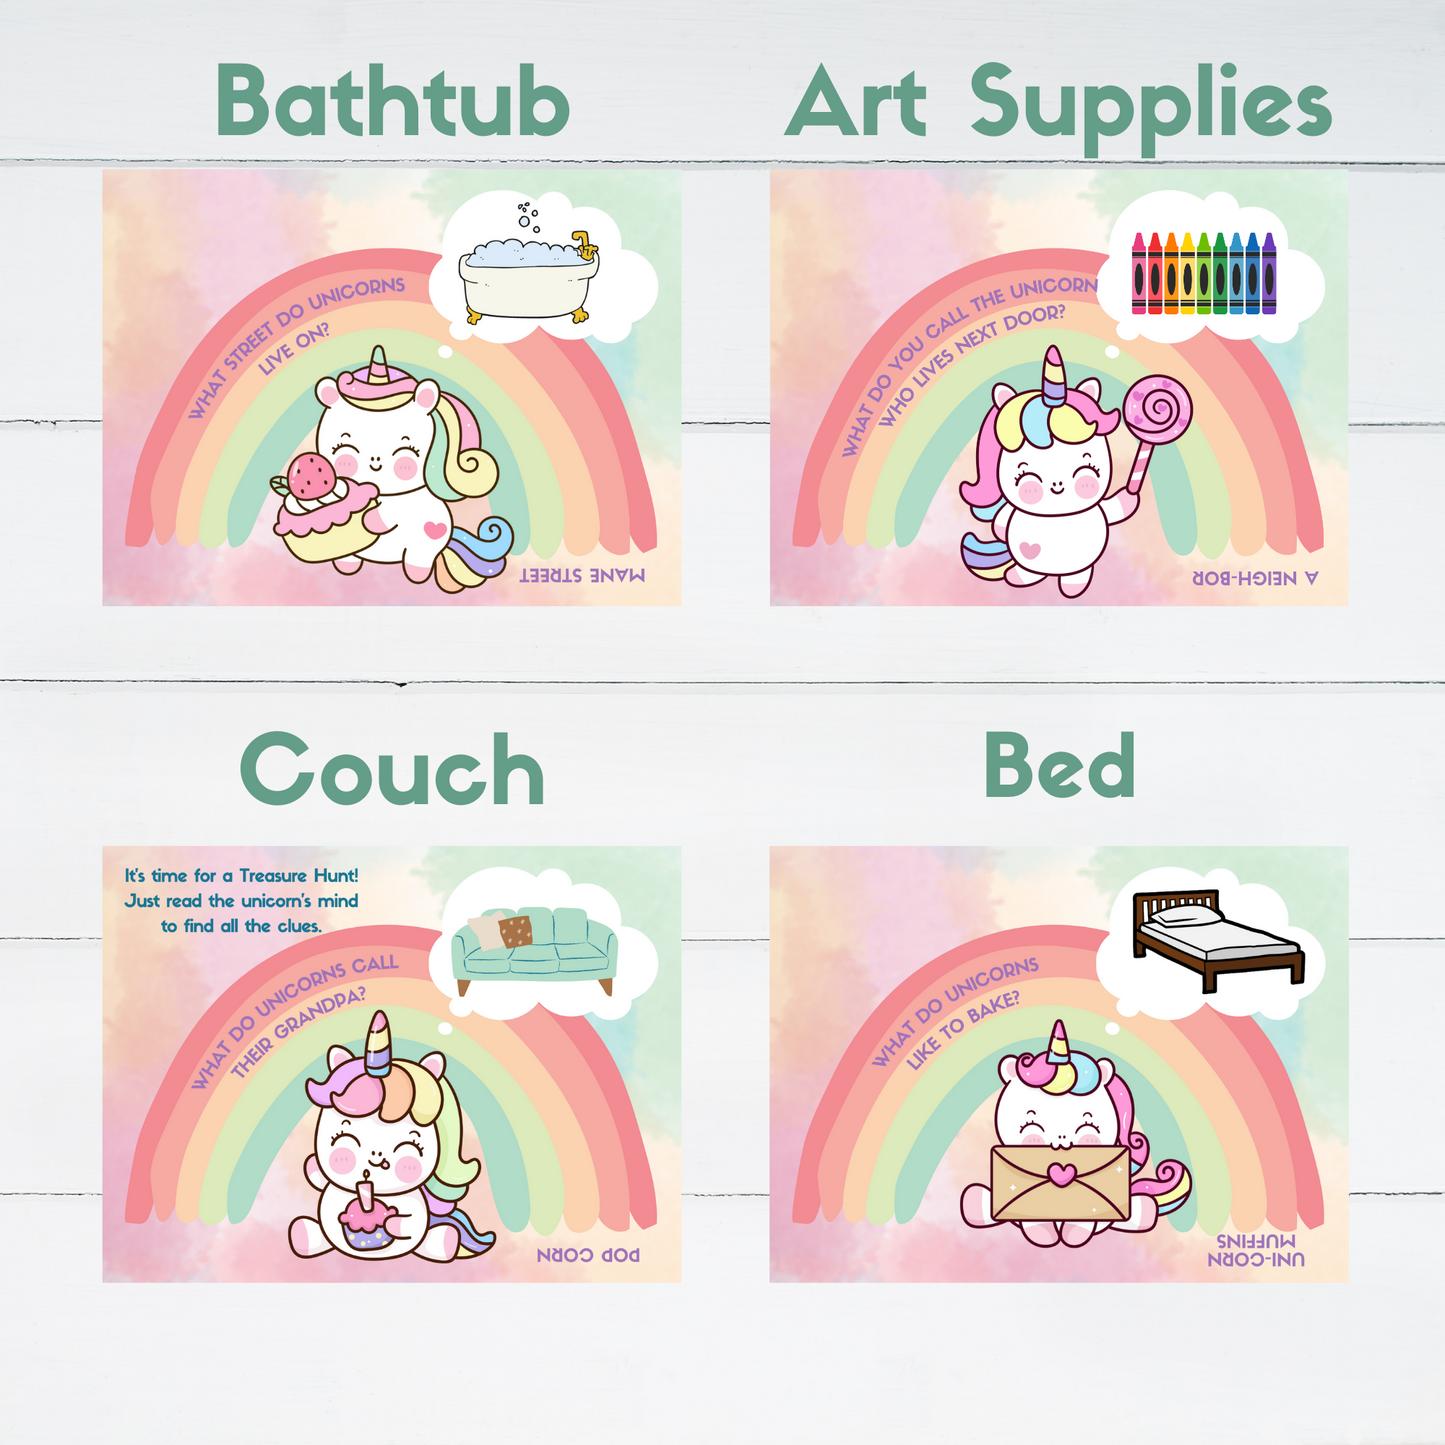 4 Treasure hunt clue cards are displayed, leading to Bathtub, Art supplies, Couch, and Bed.